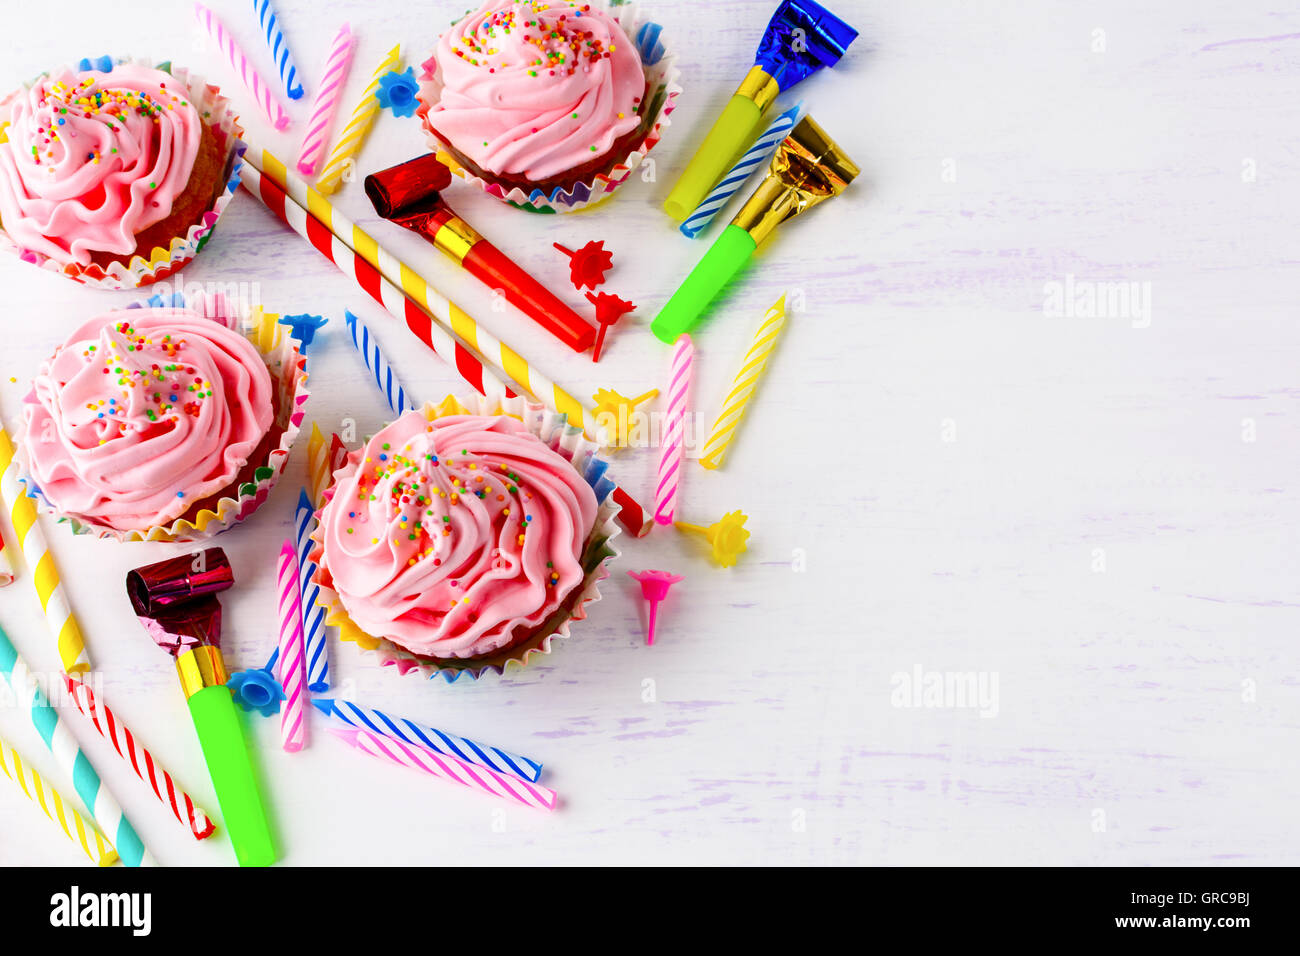 Birthday background with pink cupcakes and candles. Homemade cupcakes with whipped cream. Holiday party background. Copy space. Stock Photo